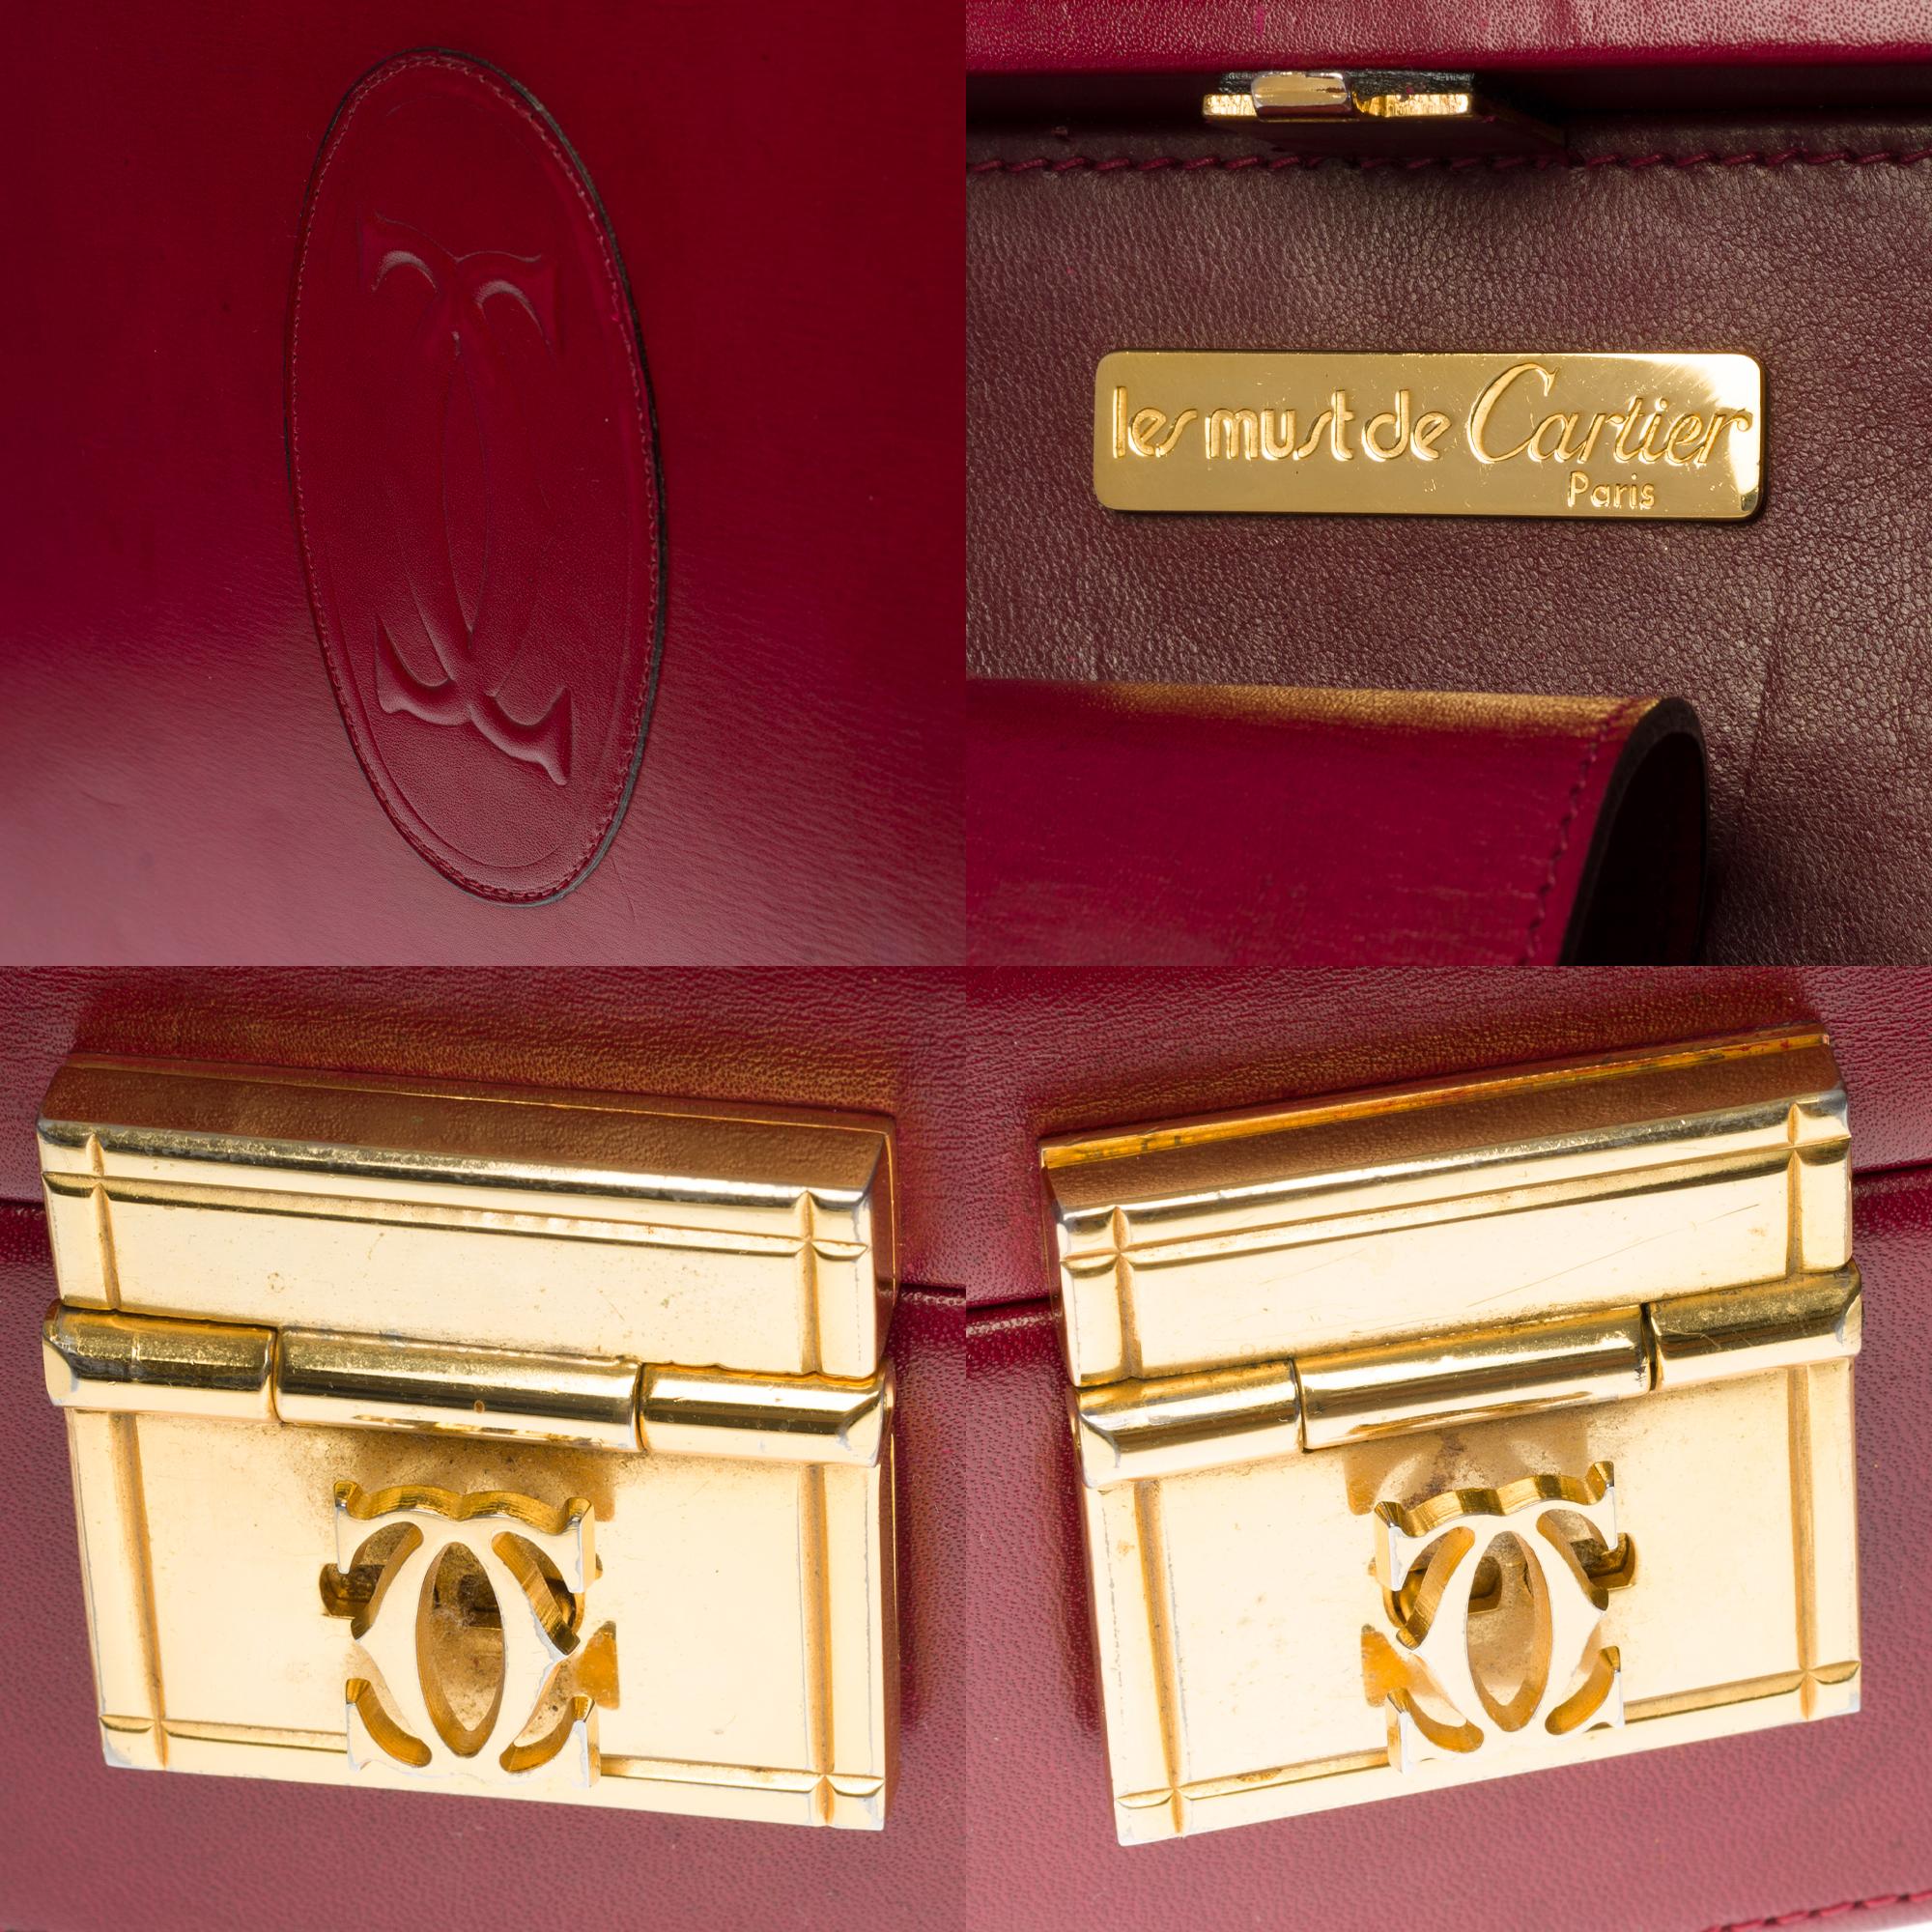 Pink Rare Cartier Attaché Case in burgundy leather and gold hardware